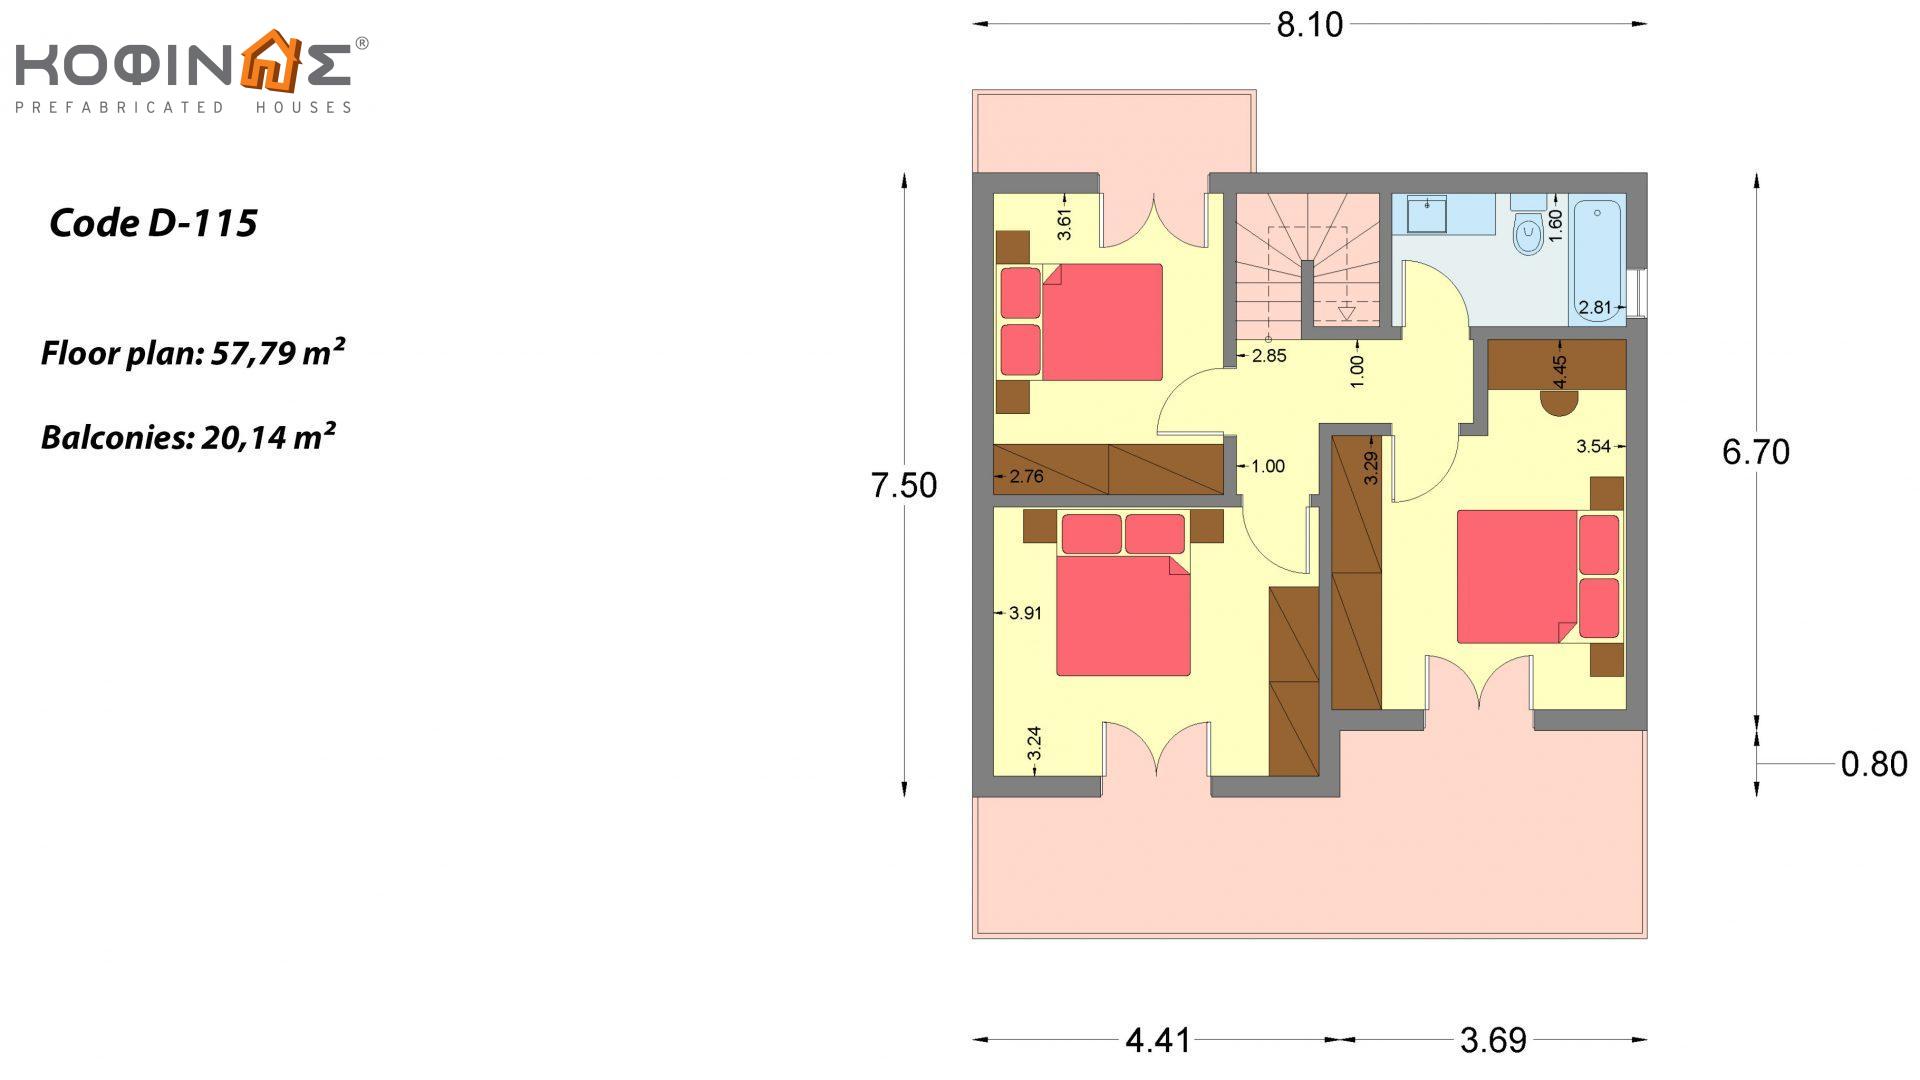 2-story house D-115, total surface of 115,58 m²,covered roofed areas 24,33 m²,balconies 20,14 m²